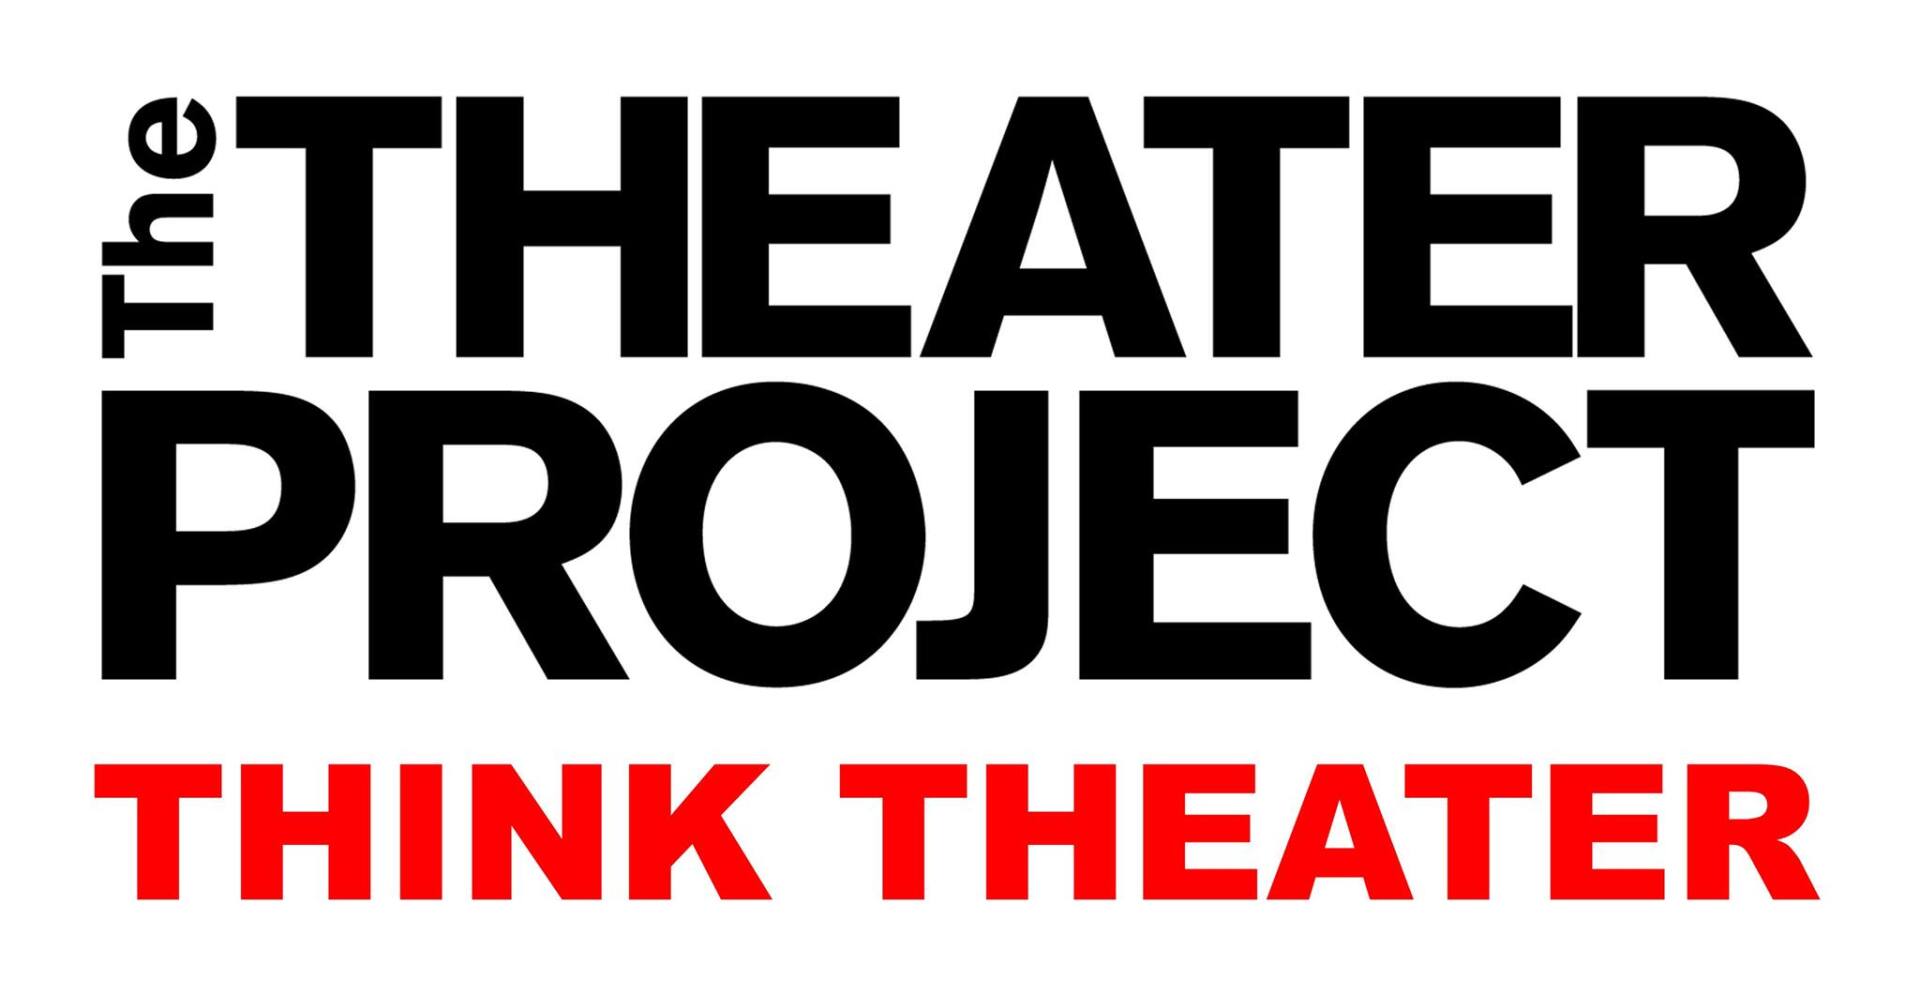 The Theater Project Think Theater logo